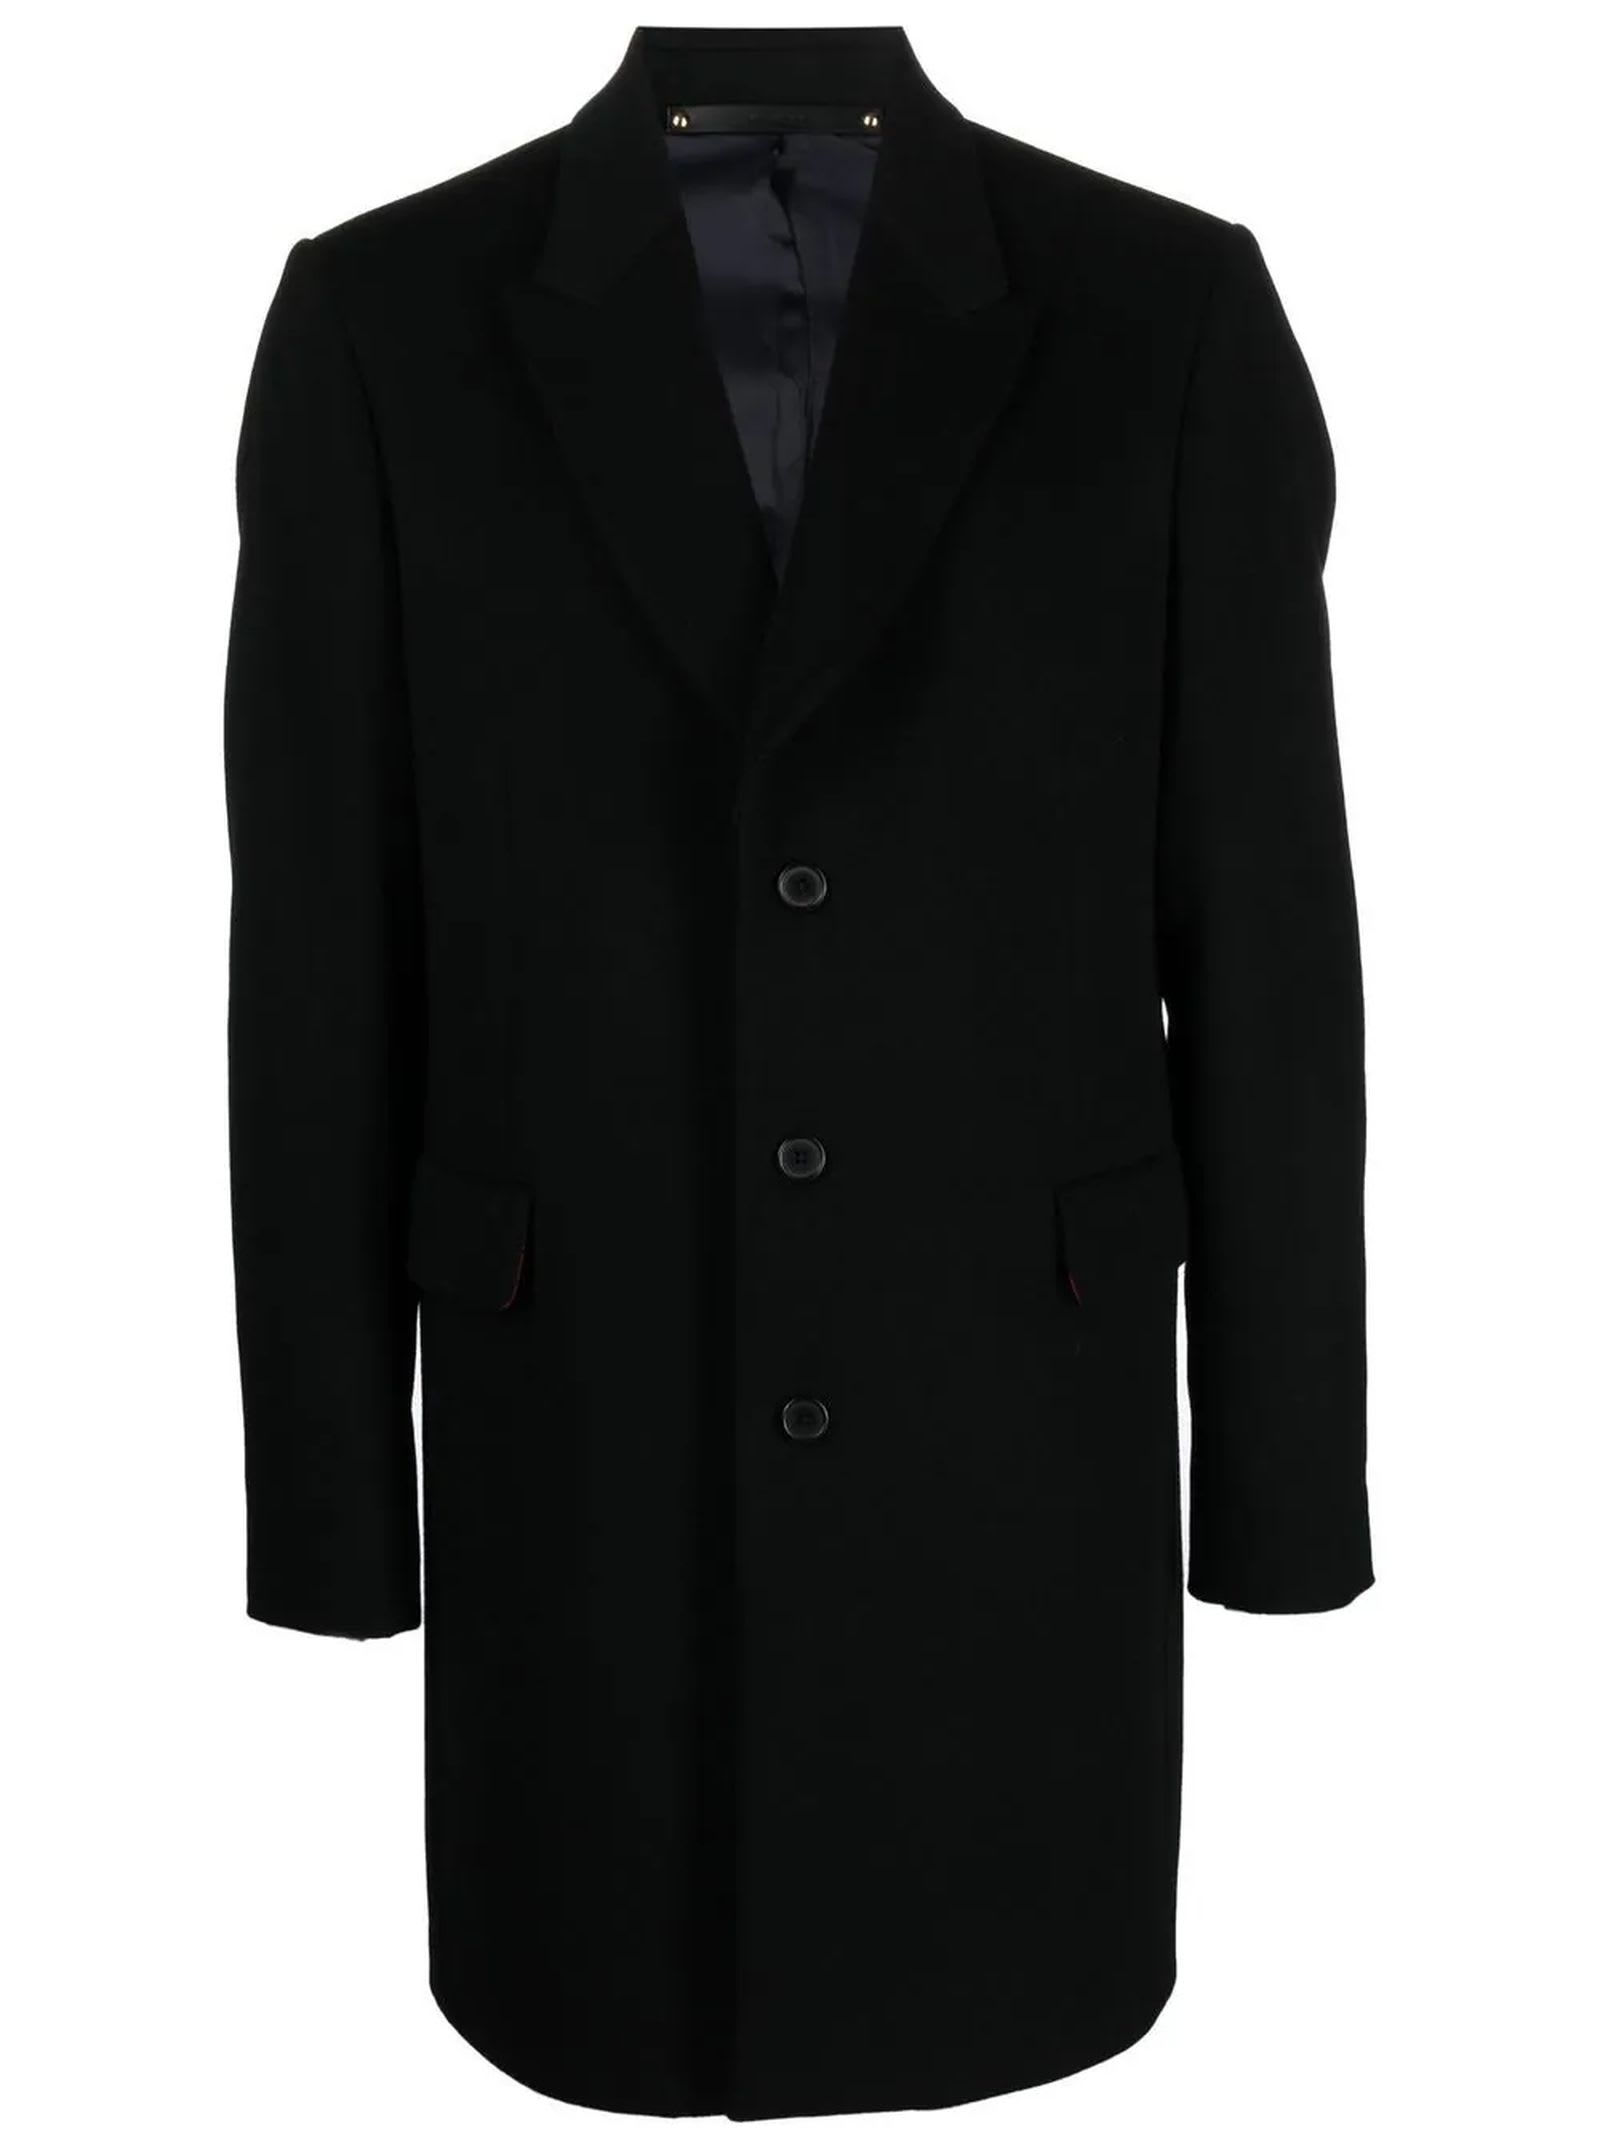 PAUL SMITH BLACK WOOL-CASHMERE BLEND OVERCOAT